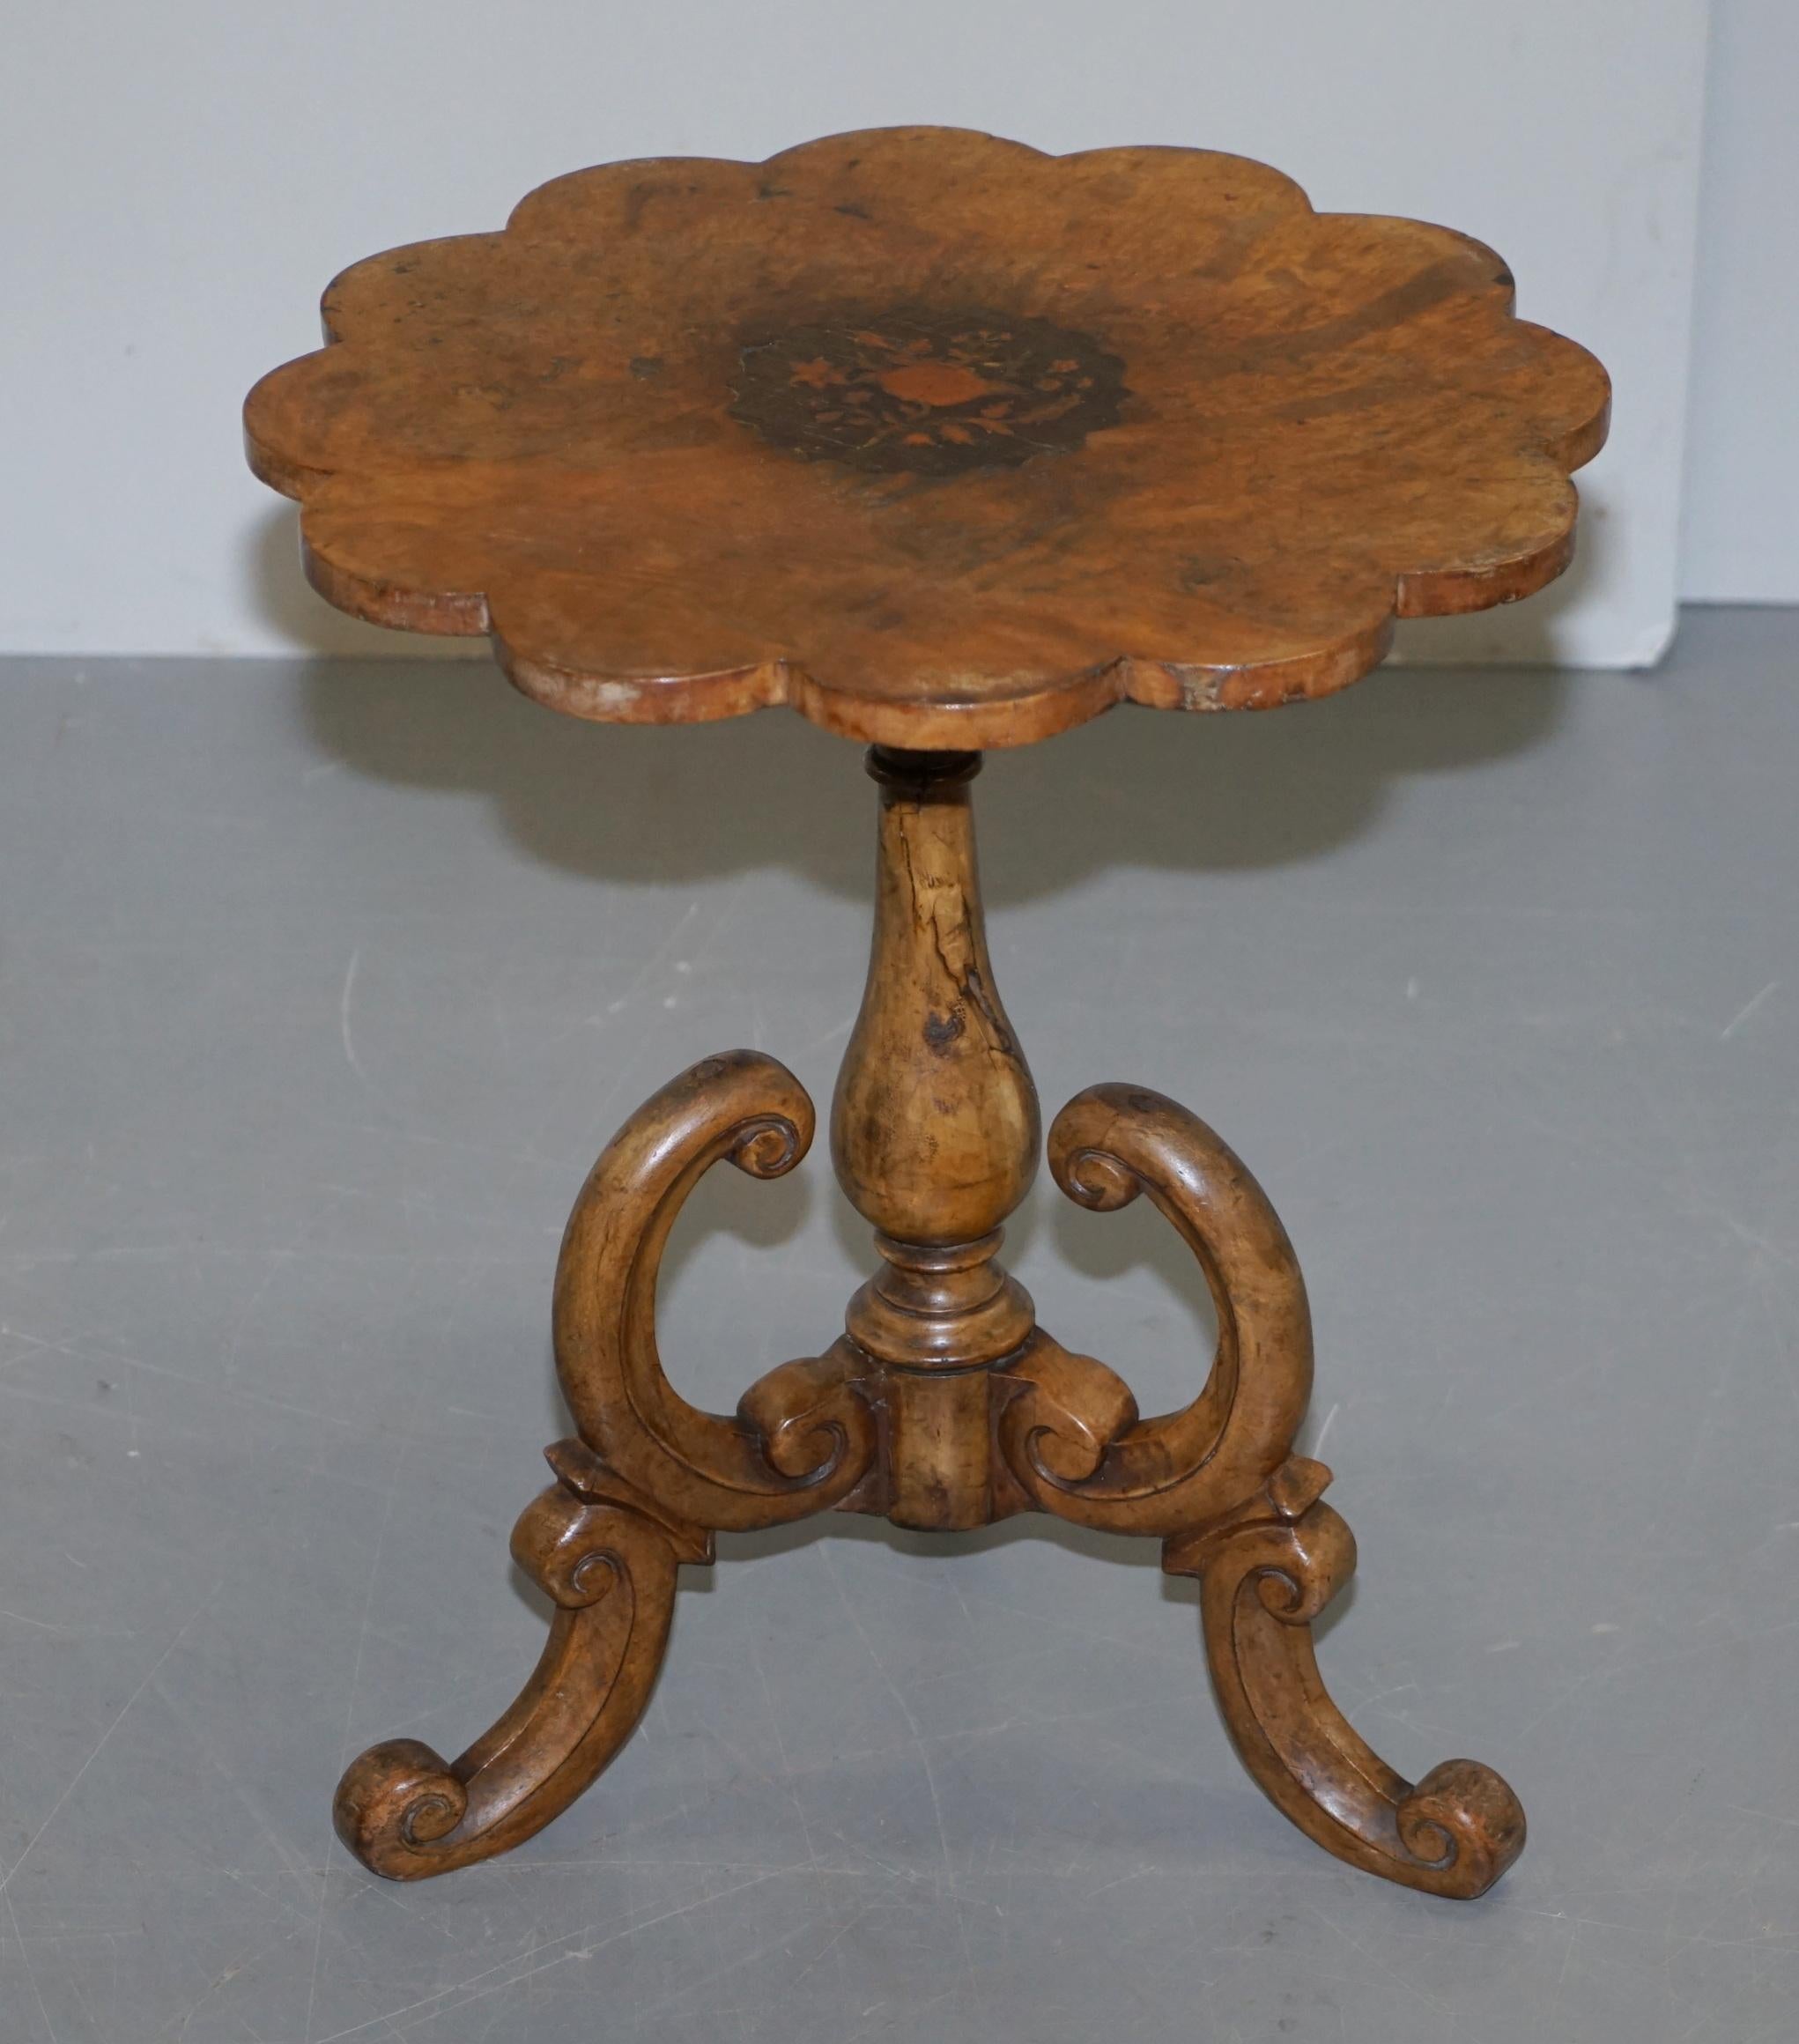 We are delighted to offer this sublime Victorian circa 1860 Burr and Burl Walnut tripod table in original condition with flower petal shaped top 

A glorious little side table, heavily sculptured to the base, the top is in the form of a flower